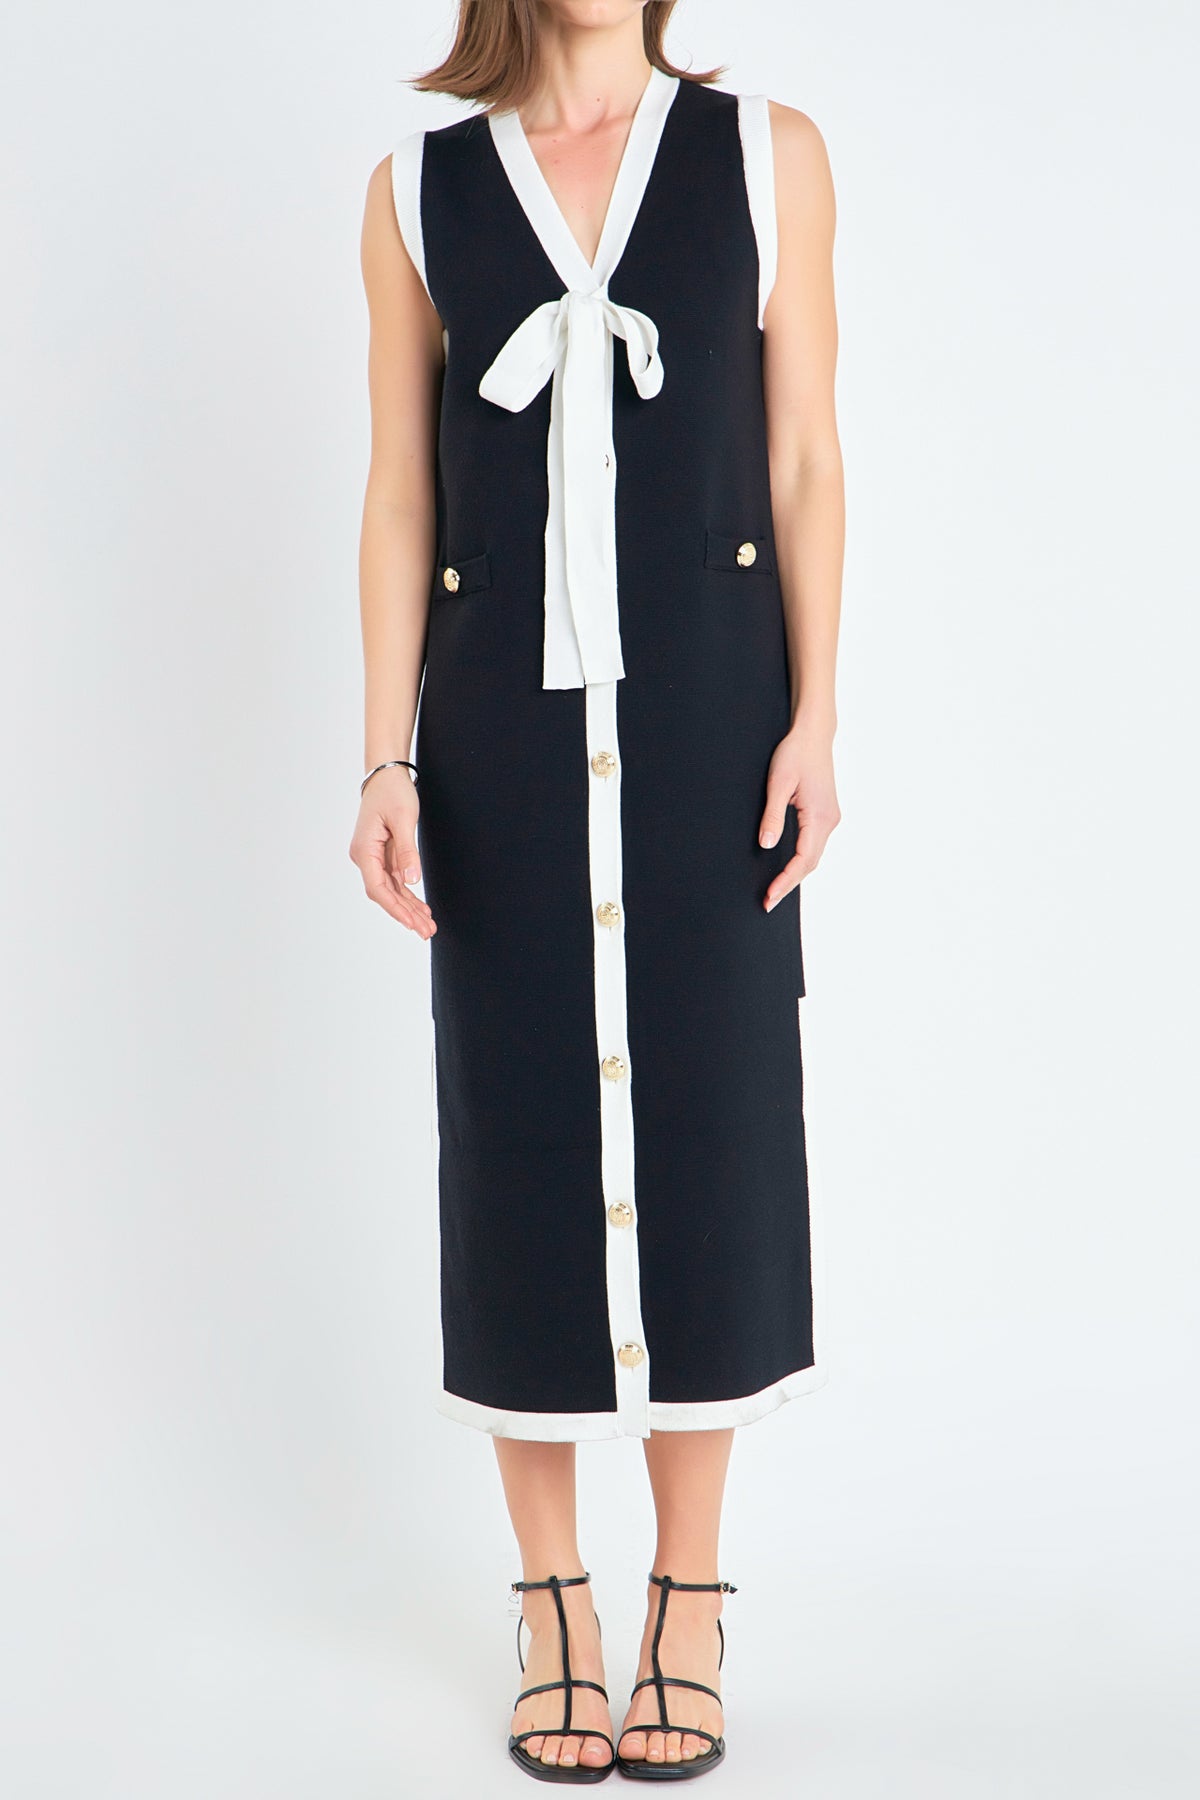 ENGLISH FACTORY - Knit Midi Dress With Ribbon Tie - DRESSES available at Objectrare